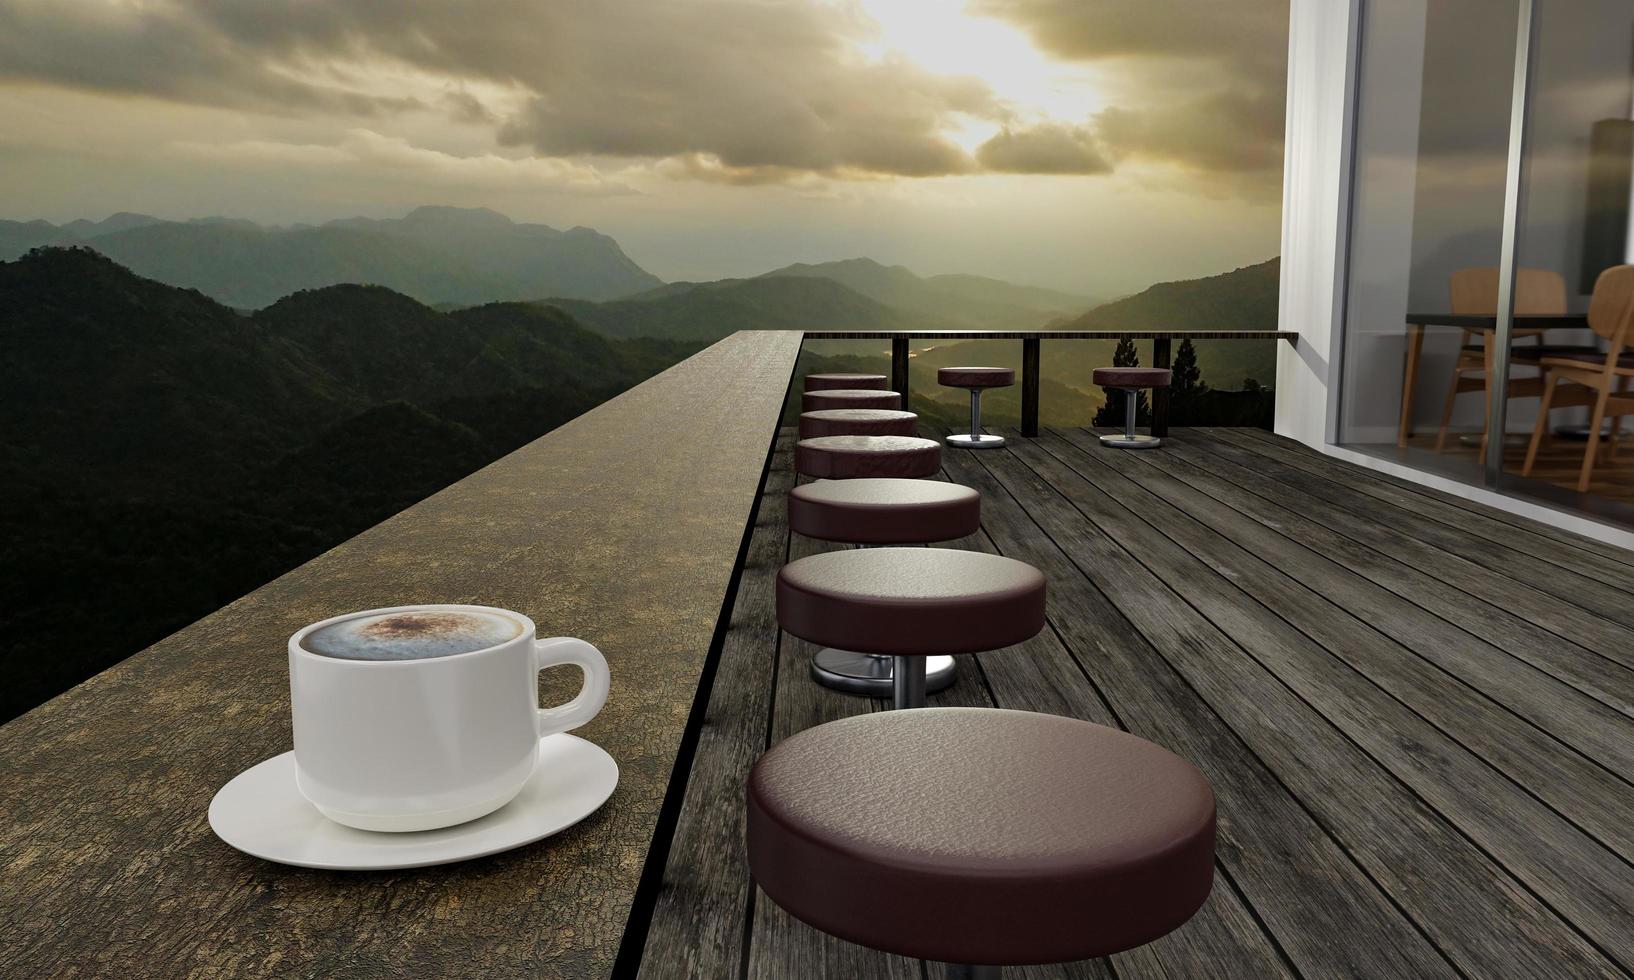 A restaurant or coffee shop has a mountainous landscape and some morning mist. The sunlight on the top of the hill. Balcony or terrace Plank floors and long tables made of wood and timber.3d Rendering photo